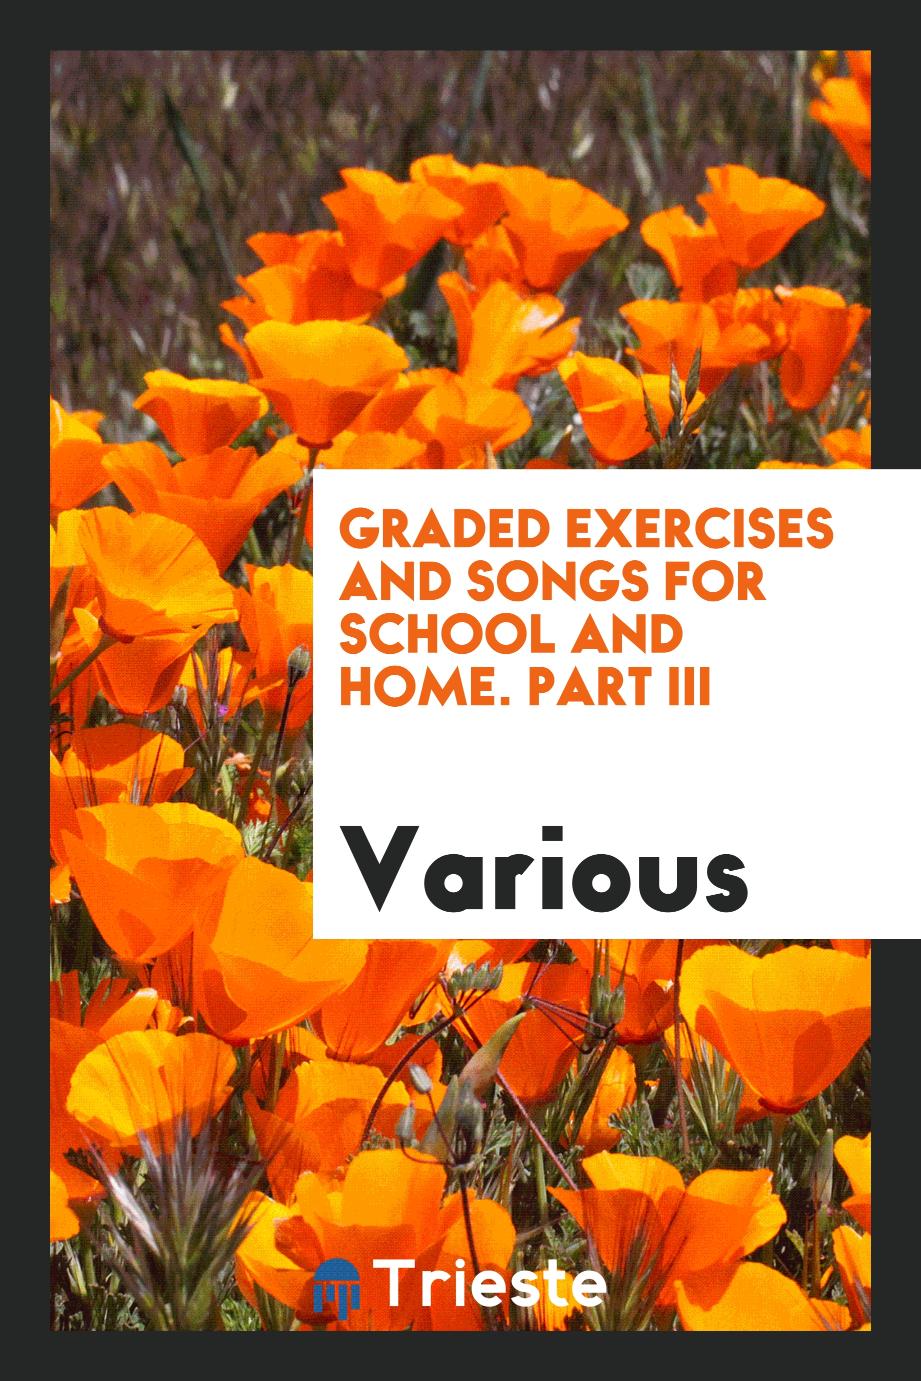 Graded Exercises and Songs for School and Home. Part III